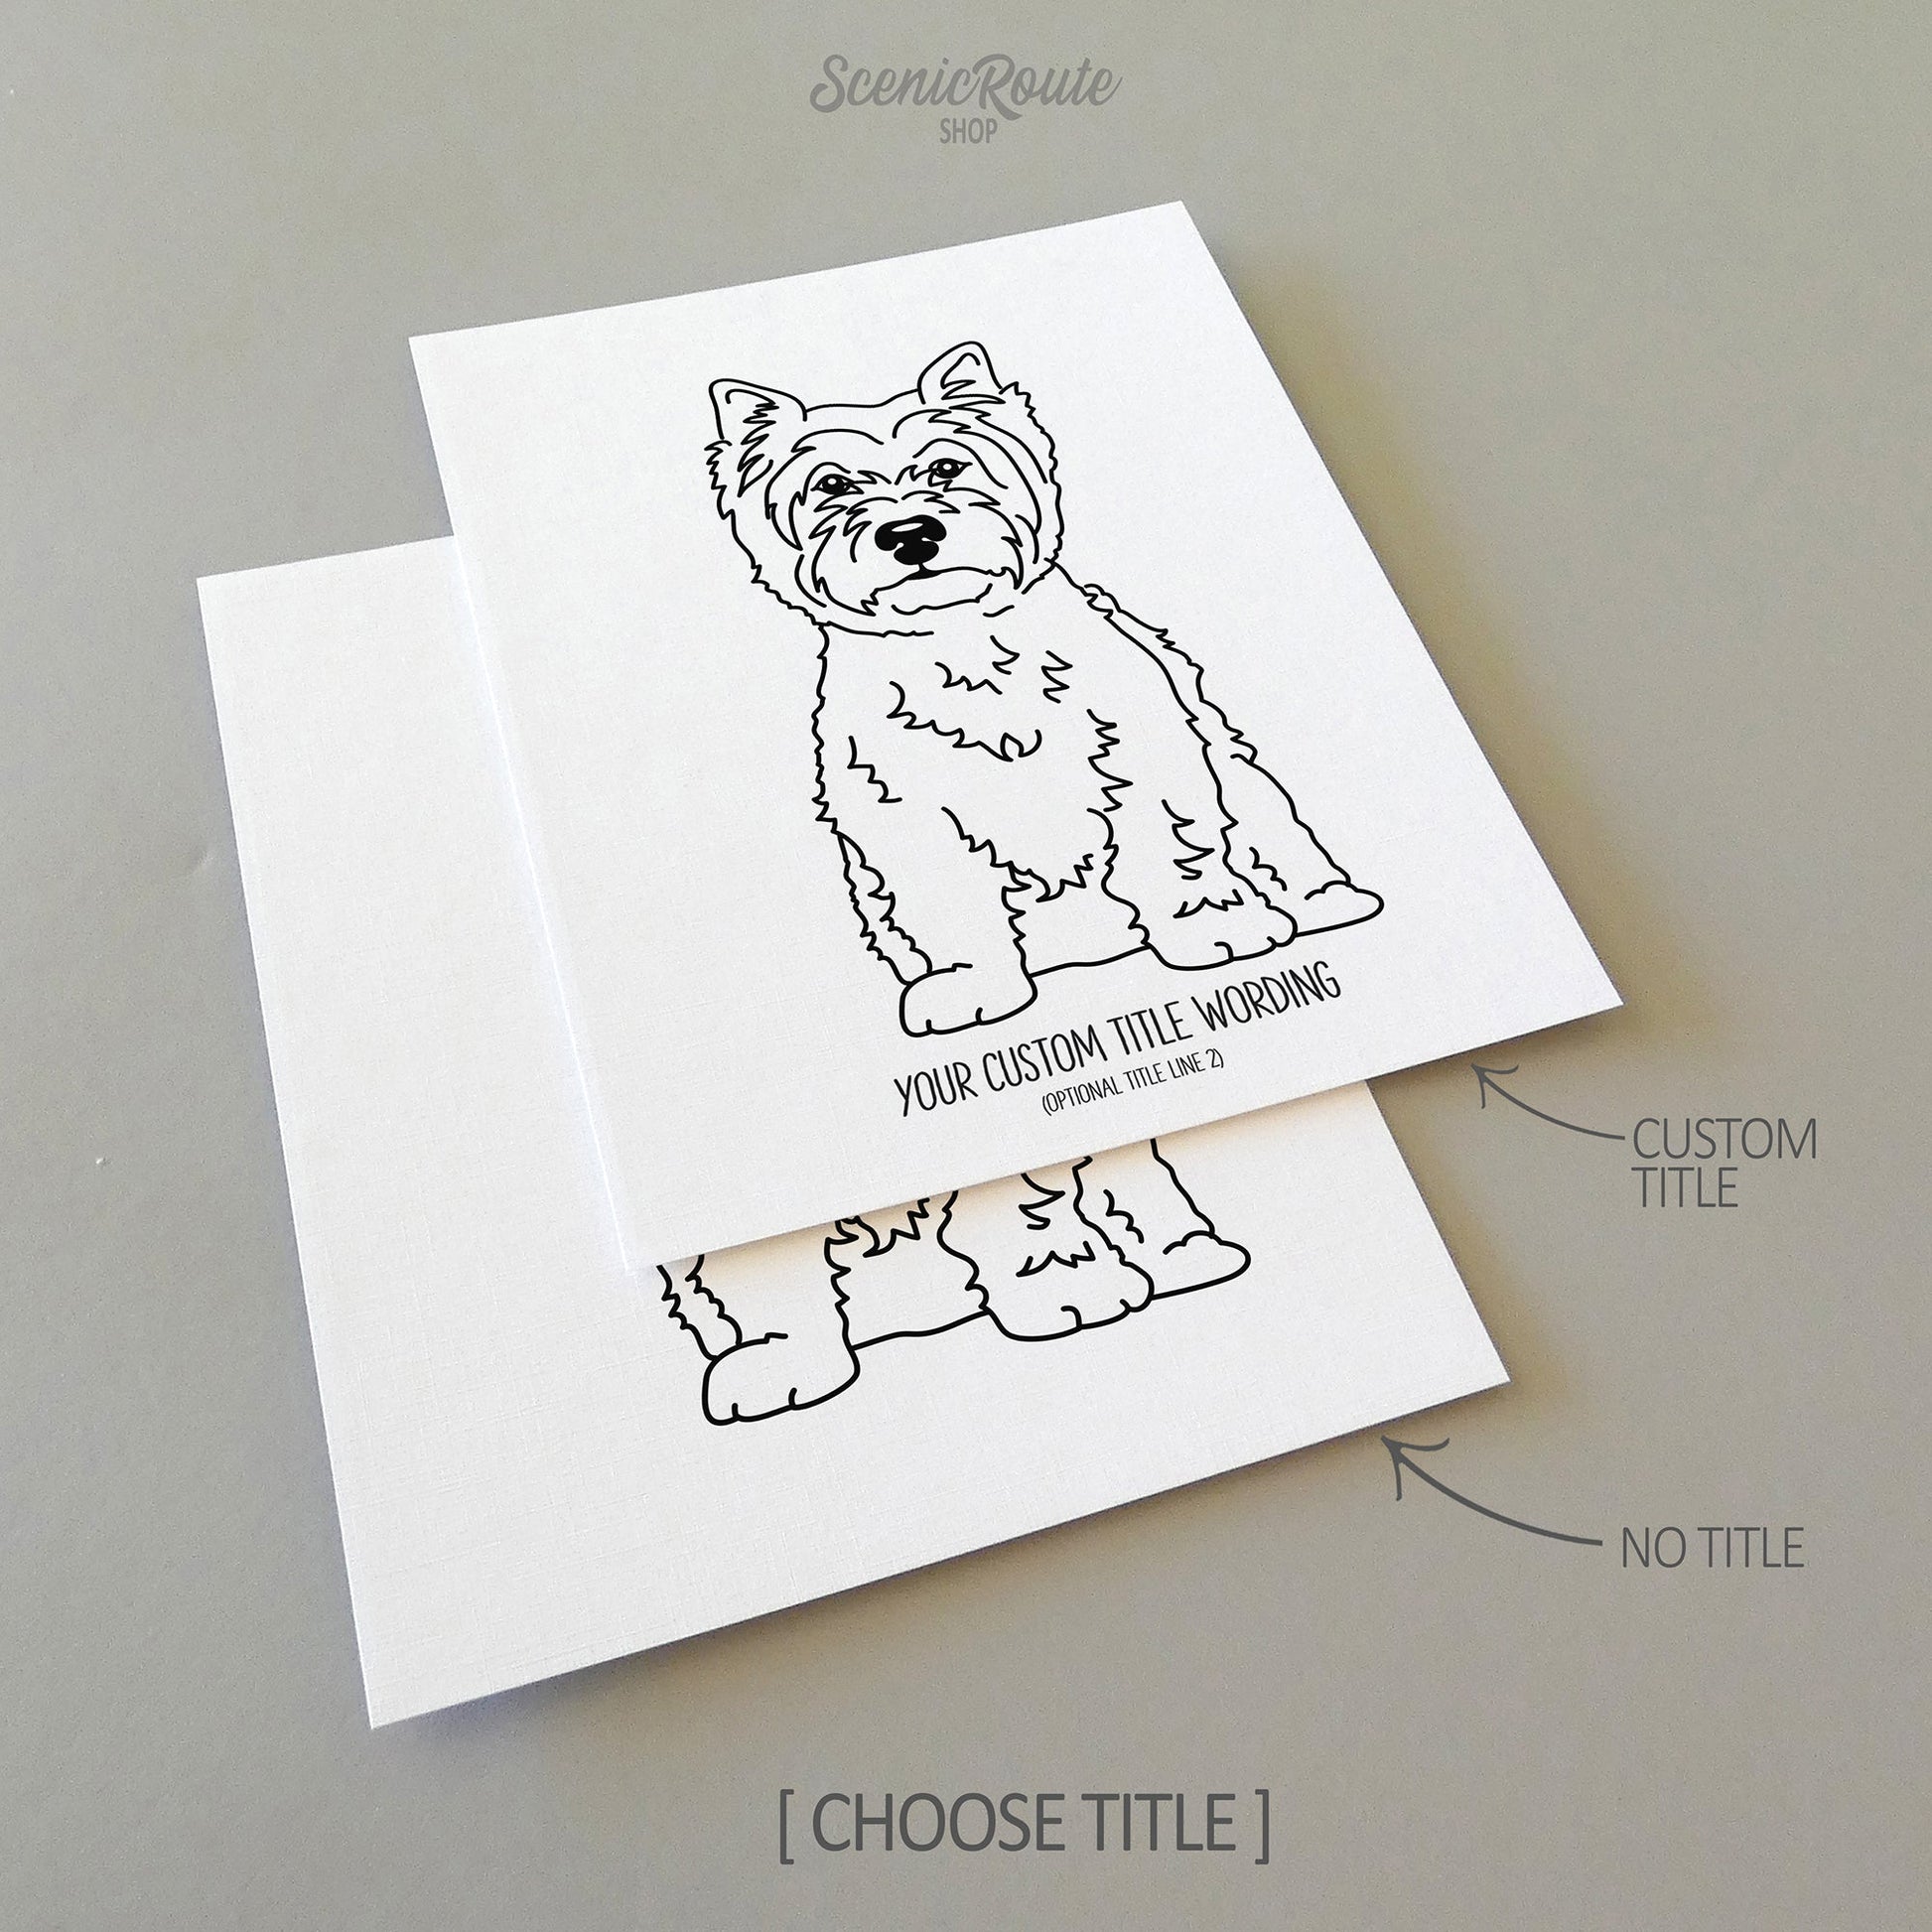 Two line art drawings of a West Highland Terrier dog on white linen paper with a gray background.  The pieces are shown with “No Title” and “Custom Title” options for the available art print options.